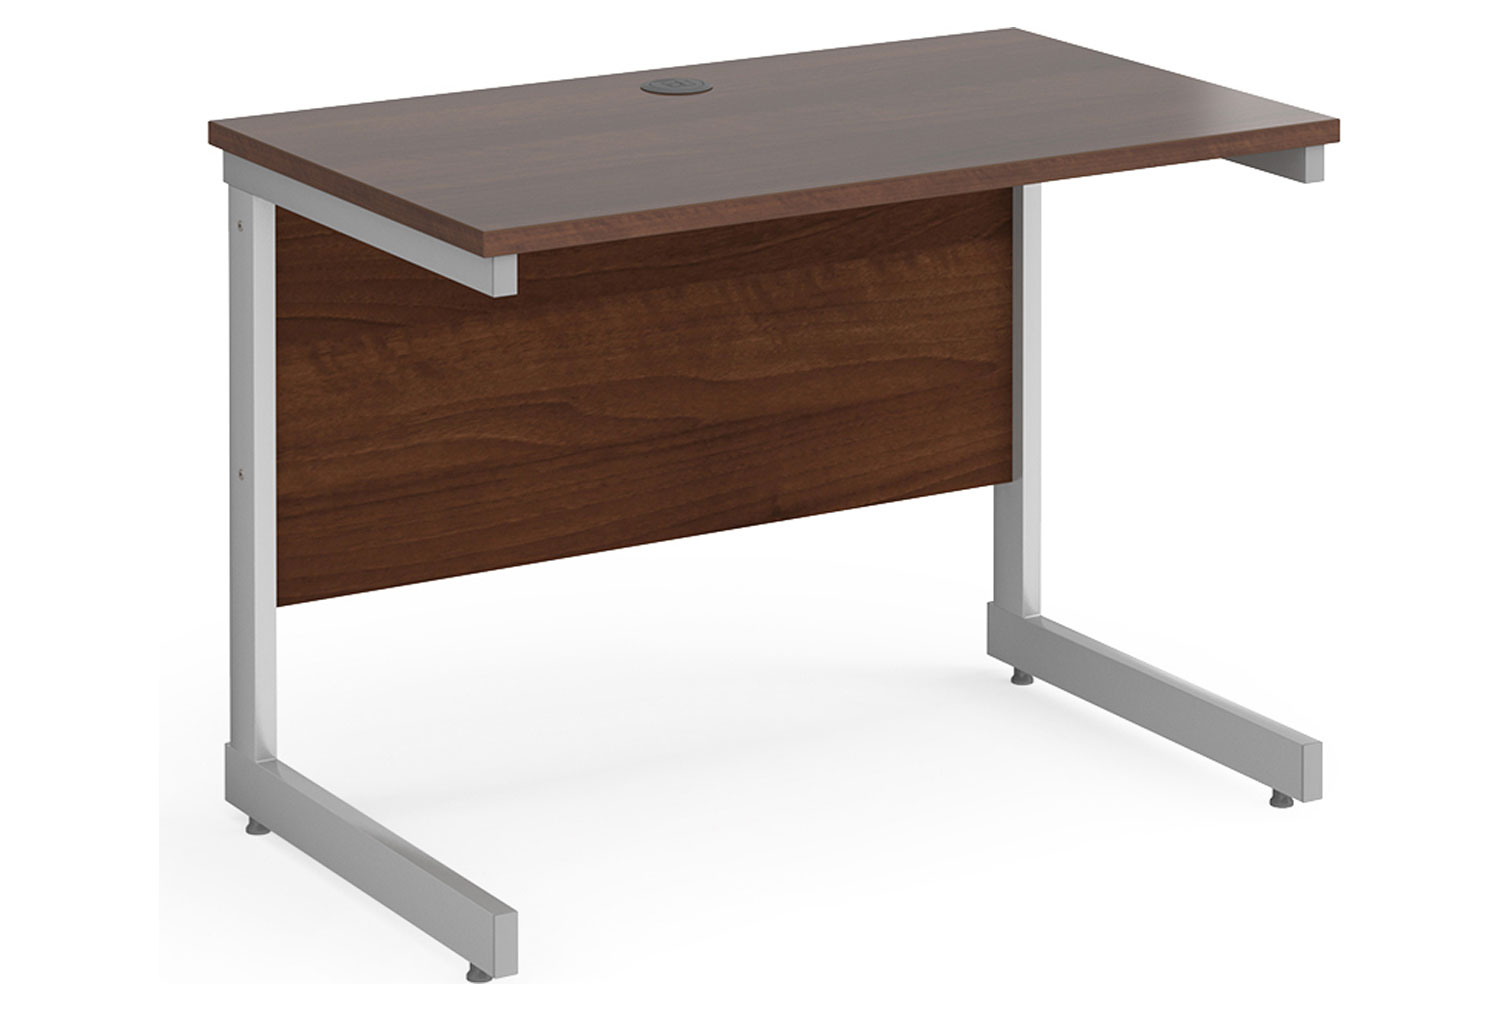 Thrifty Next-Day Narrow Rectangular Office Desk Walnut, 100wx60dx73h (cm), Express Delivery